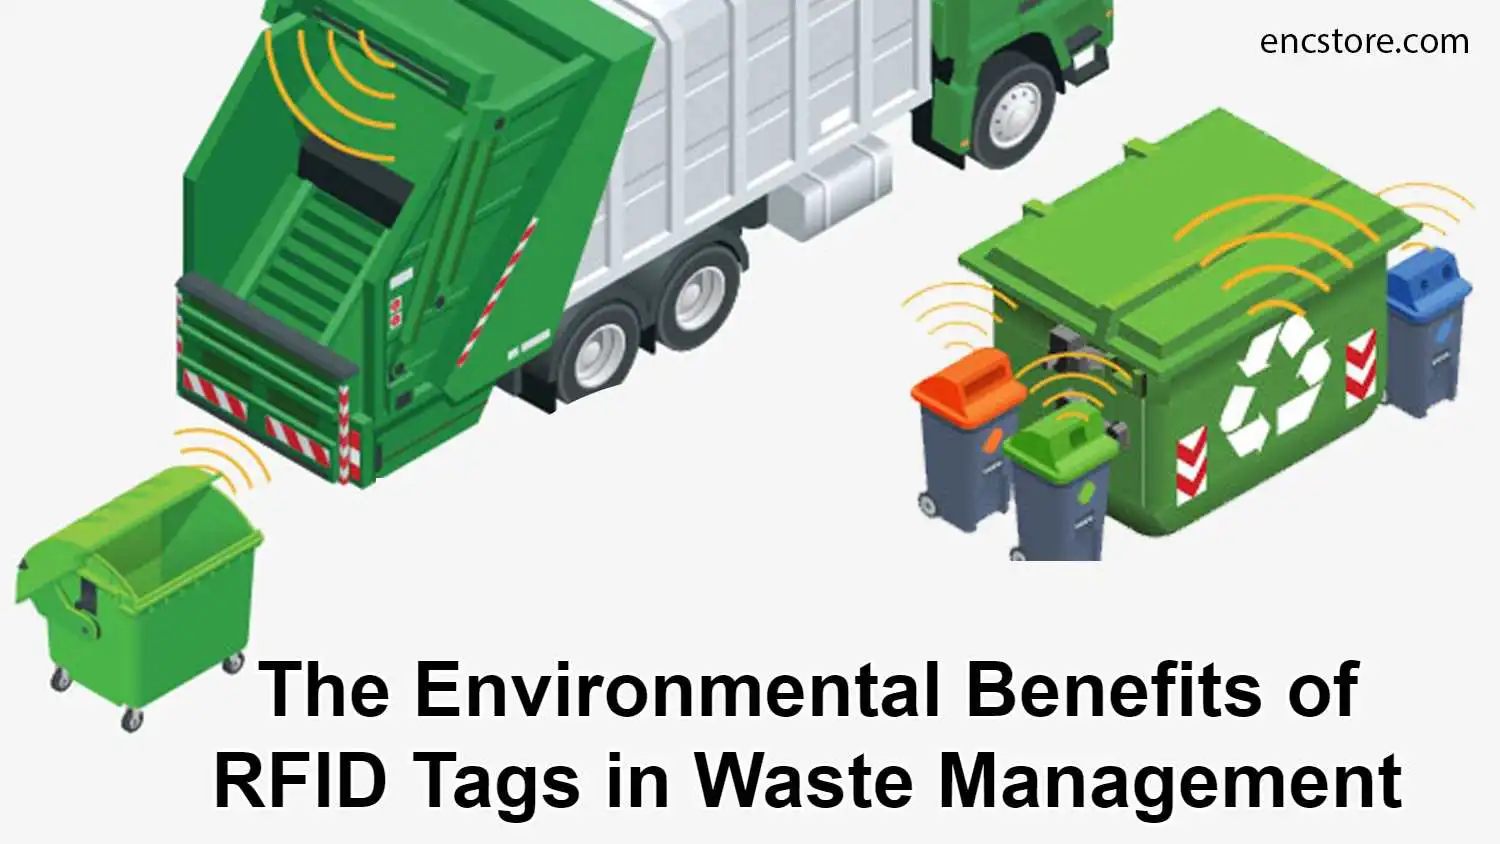 The Environmental Benefits of RFID Tags in Waste Management